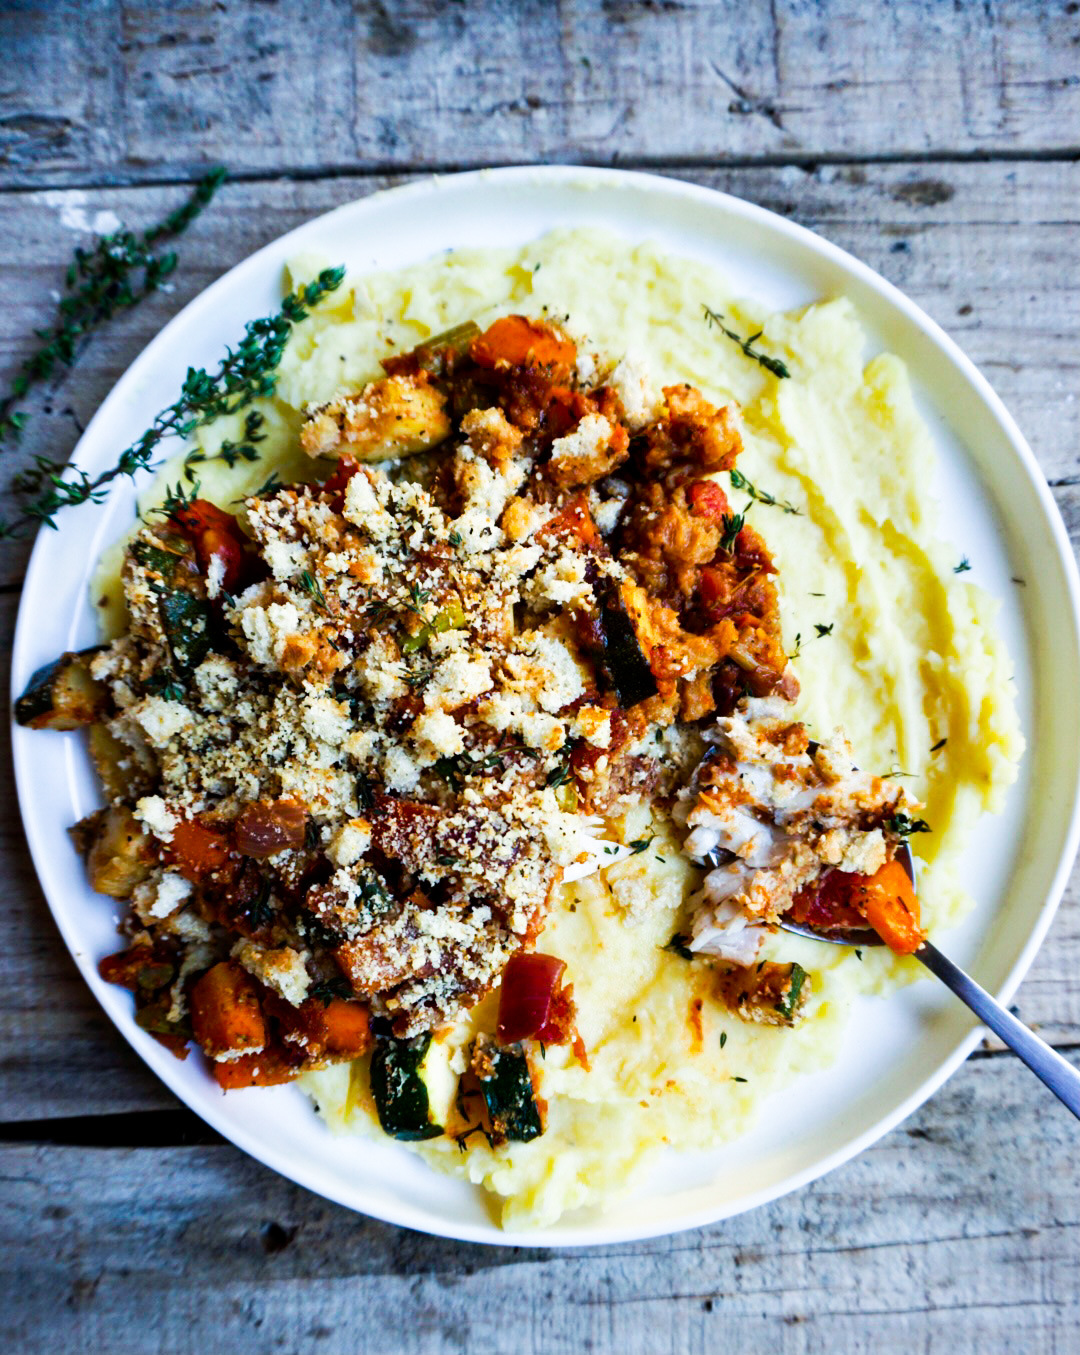 Mediterranean fish stew with herb crumble - a healthy recipe by Familicious